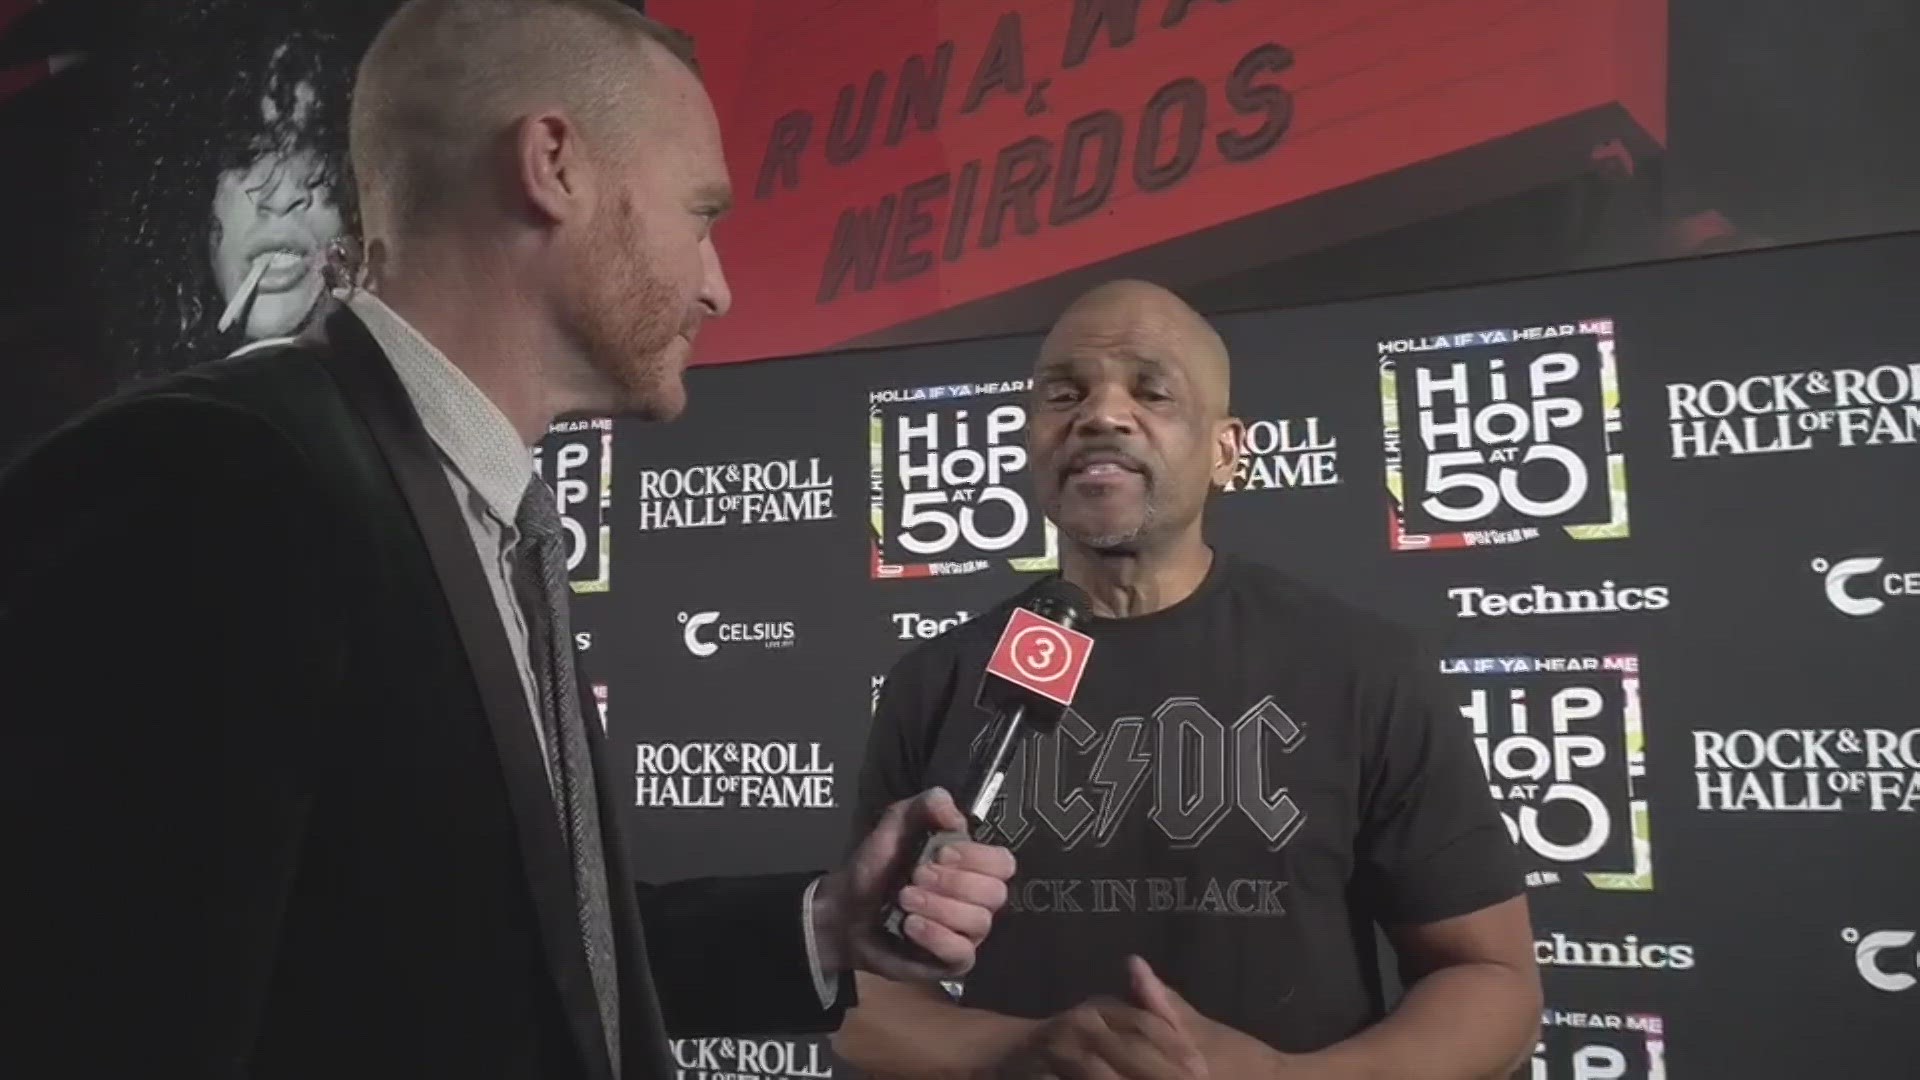 The Rock & Roll Hall of Fame is opening its 50 Years of Hip-Hop exhibit. Mike Polk Jr. spoke with RUN DMC's Darryl McDaniels to celebrate the occasion.